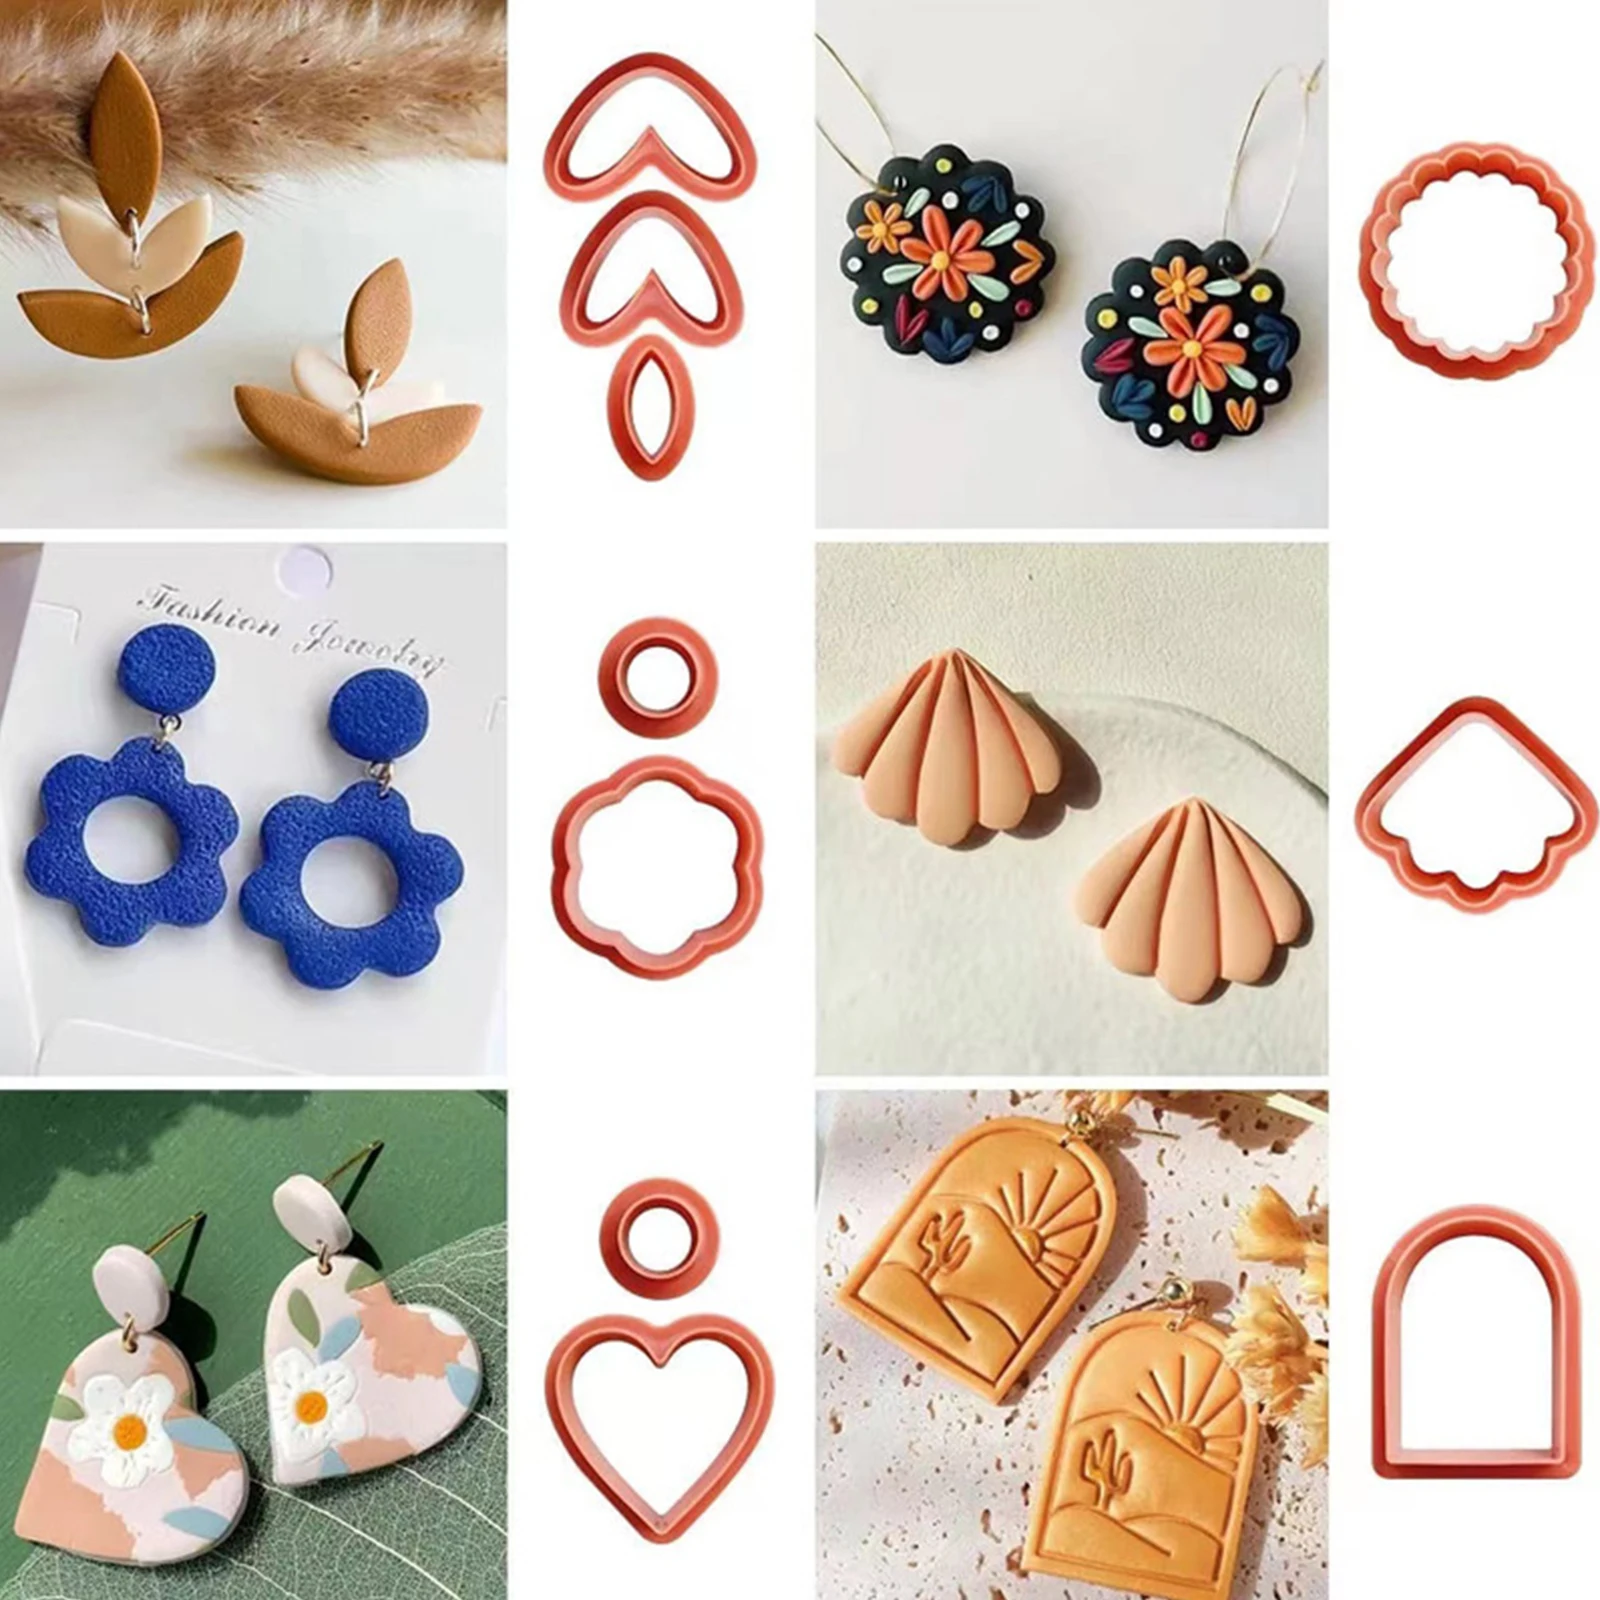 

24/142pcs Polymer Clay Cutters Set 24 Shapes Plastic Clay Cutter Set Jewelry Mold Earring Making Accessories Kids DIY Clay Tools